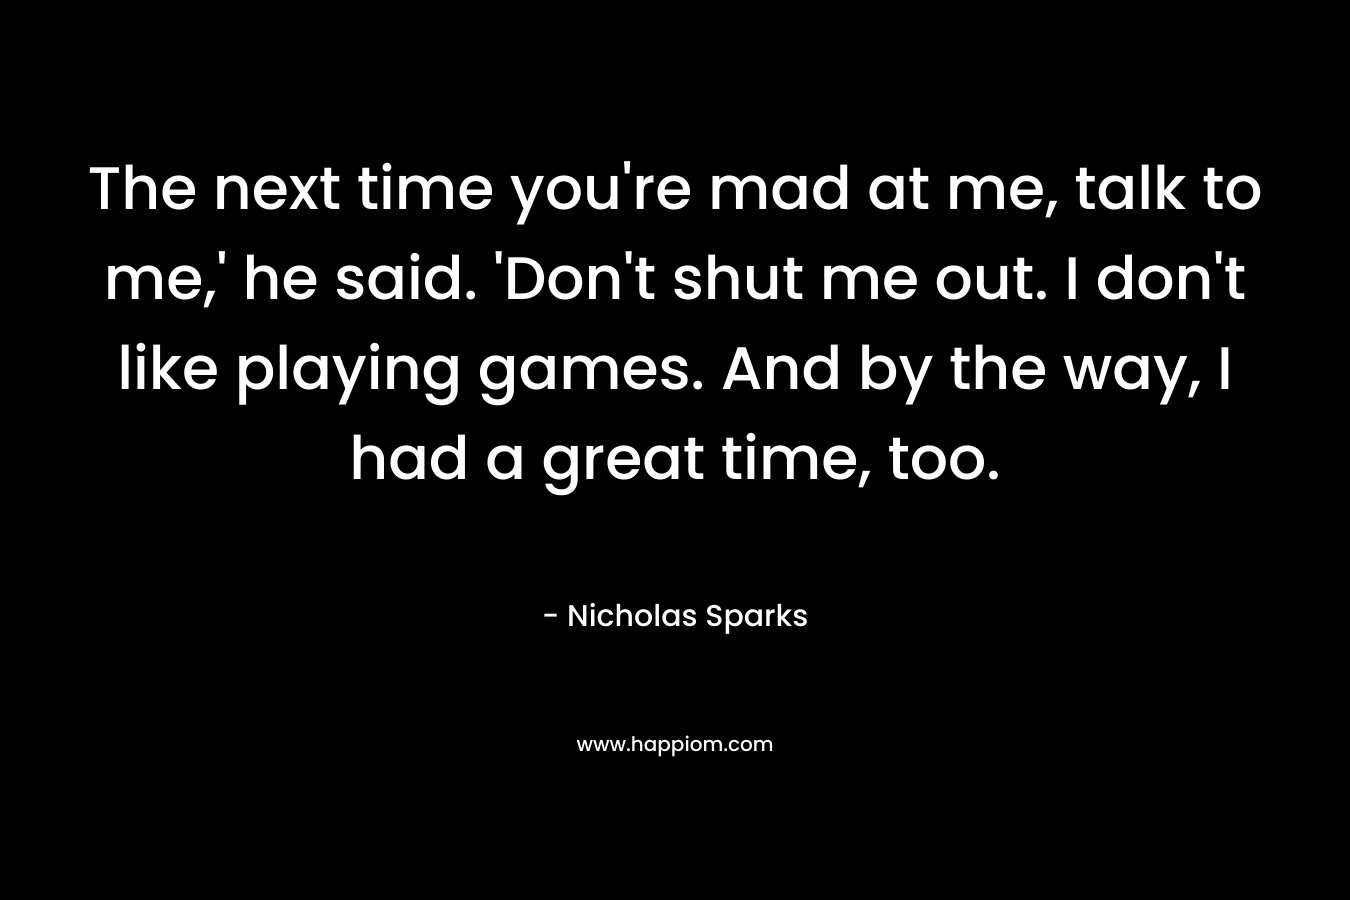 The next time you’re mad at me, talk to me,’ he said. ‘Don’t shut me out. I don’t like playing games. And by the way, I had a great time, too. – Nicholas Sparks